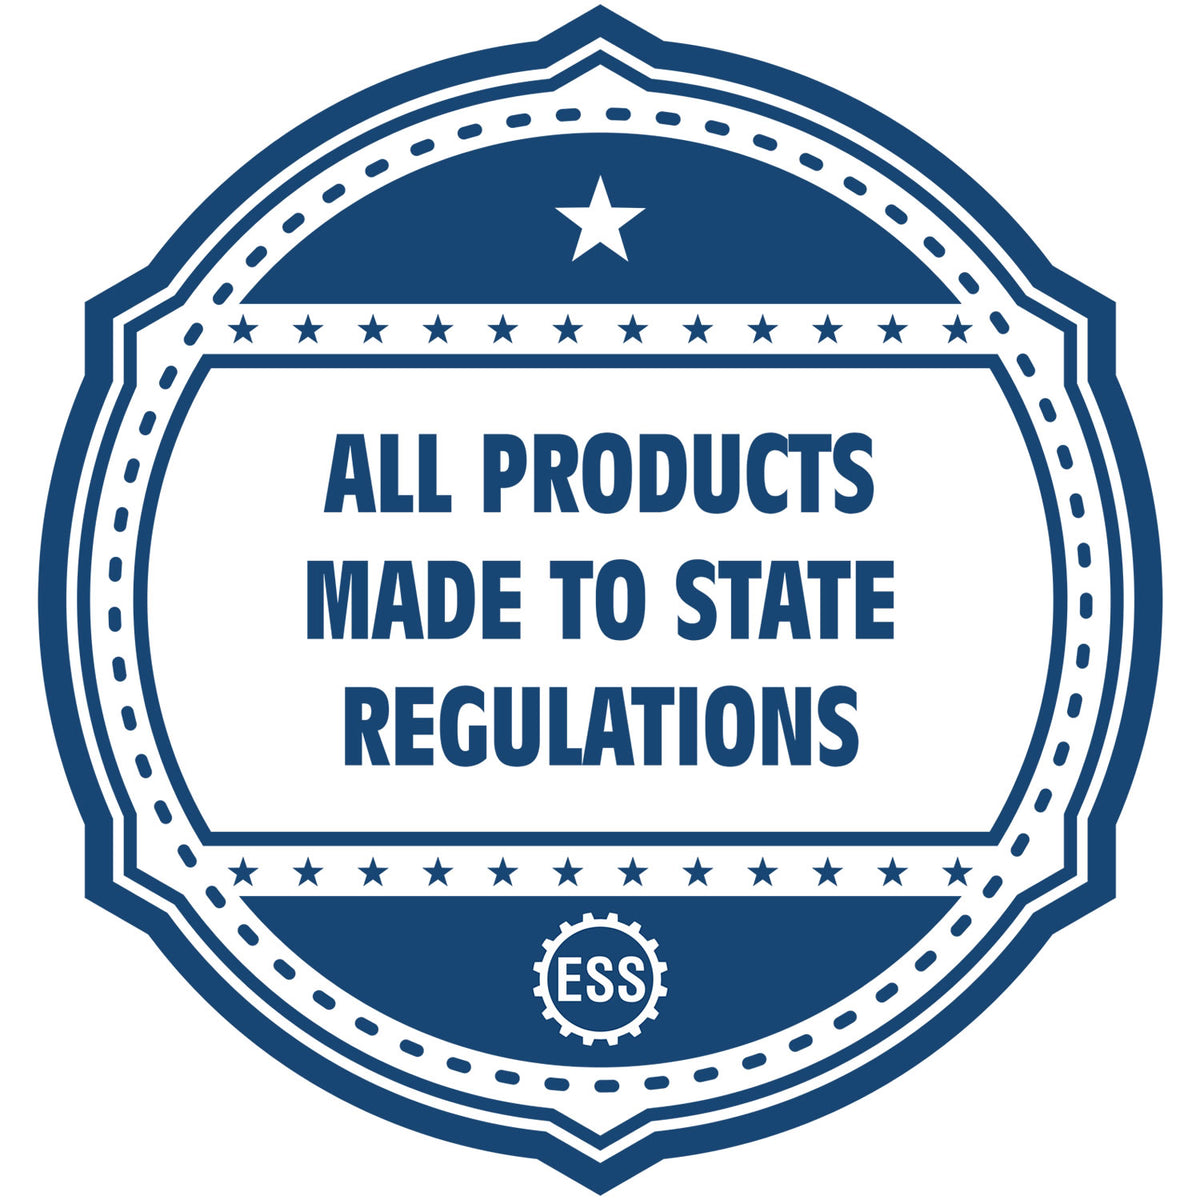 An icon or badge element for the Heavy-Duty South Carolina Rectangular Notary Stamp showing that this product is made in compliance with state regulations.